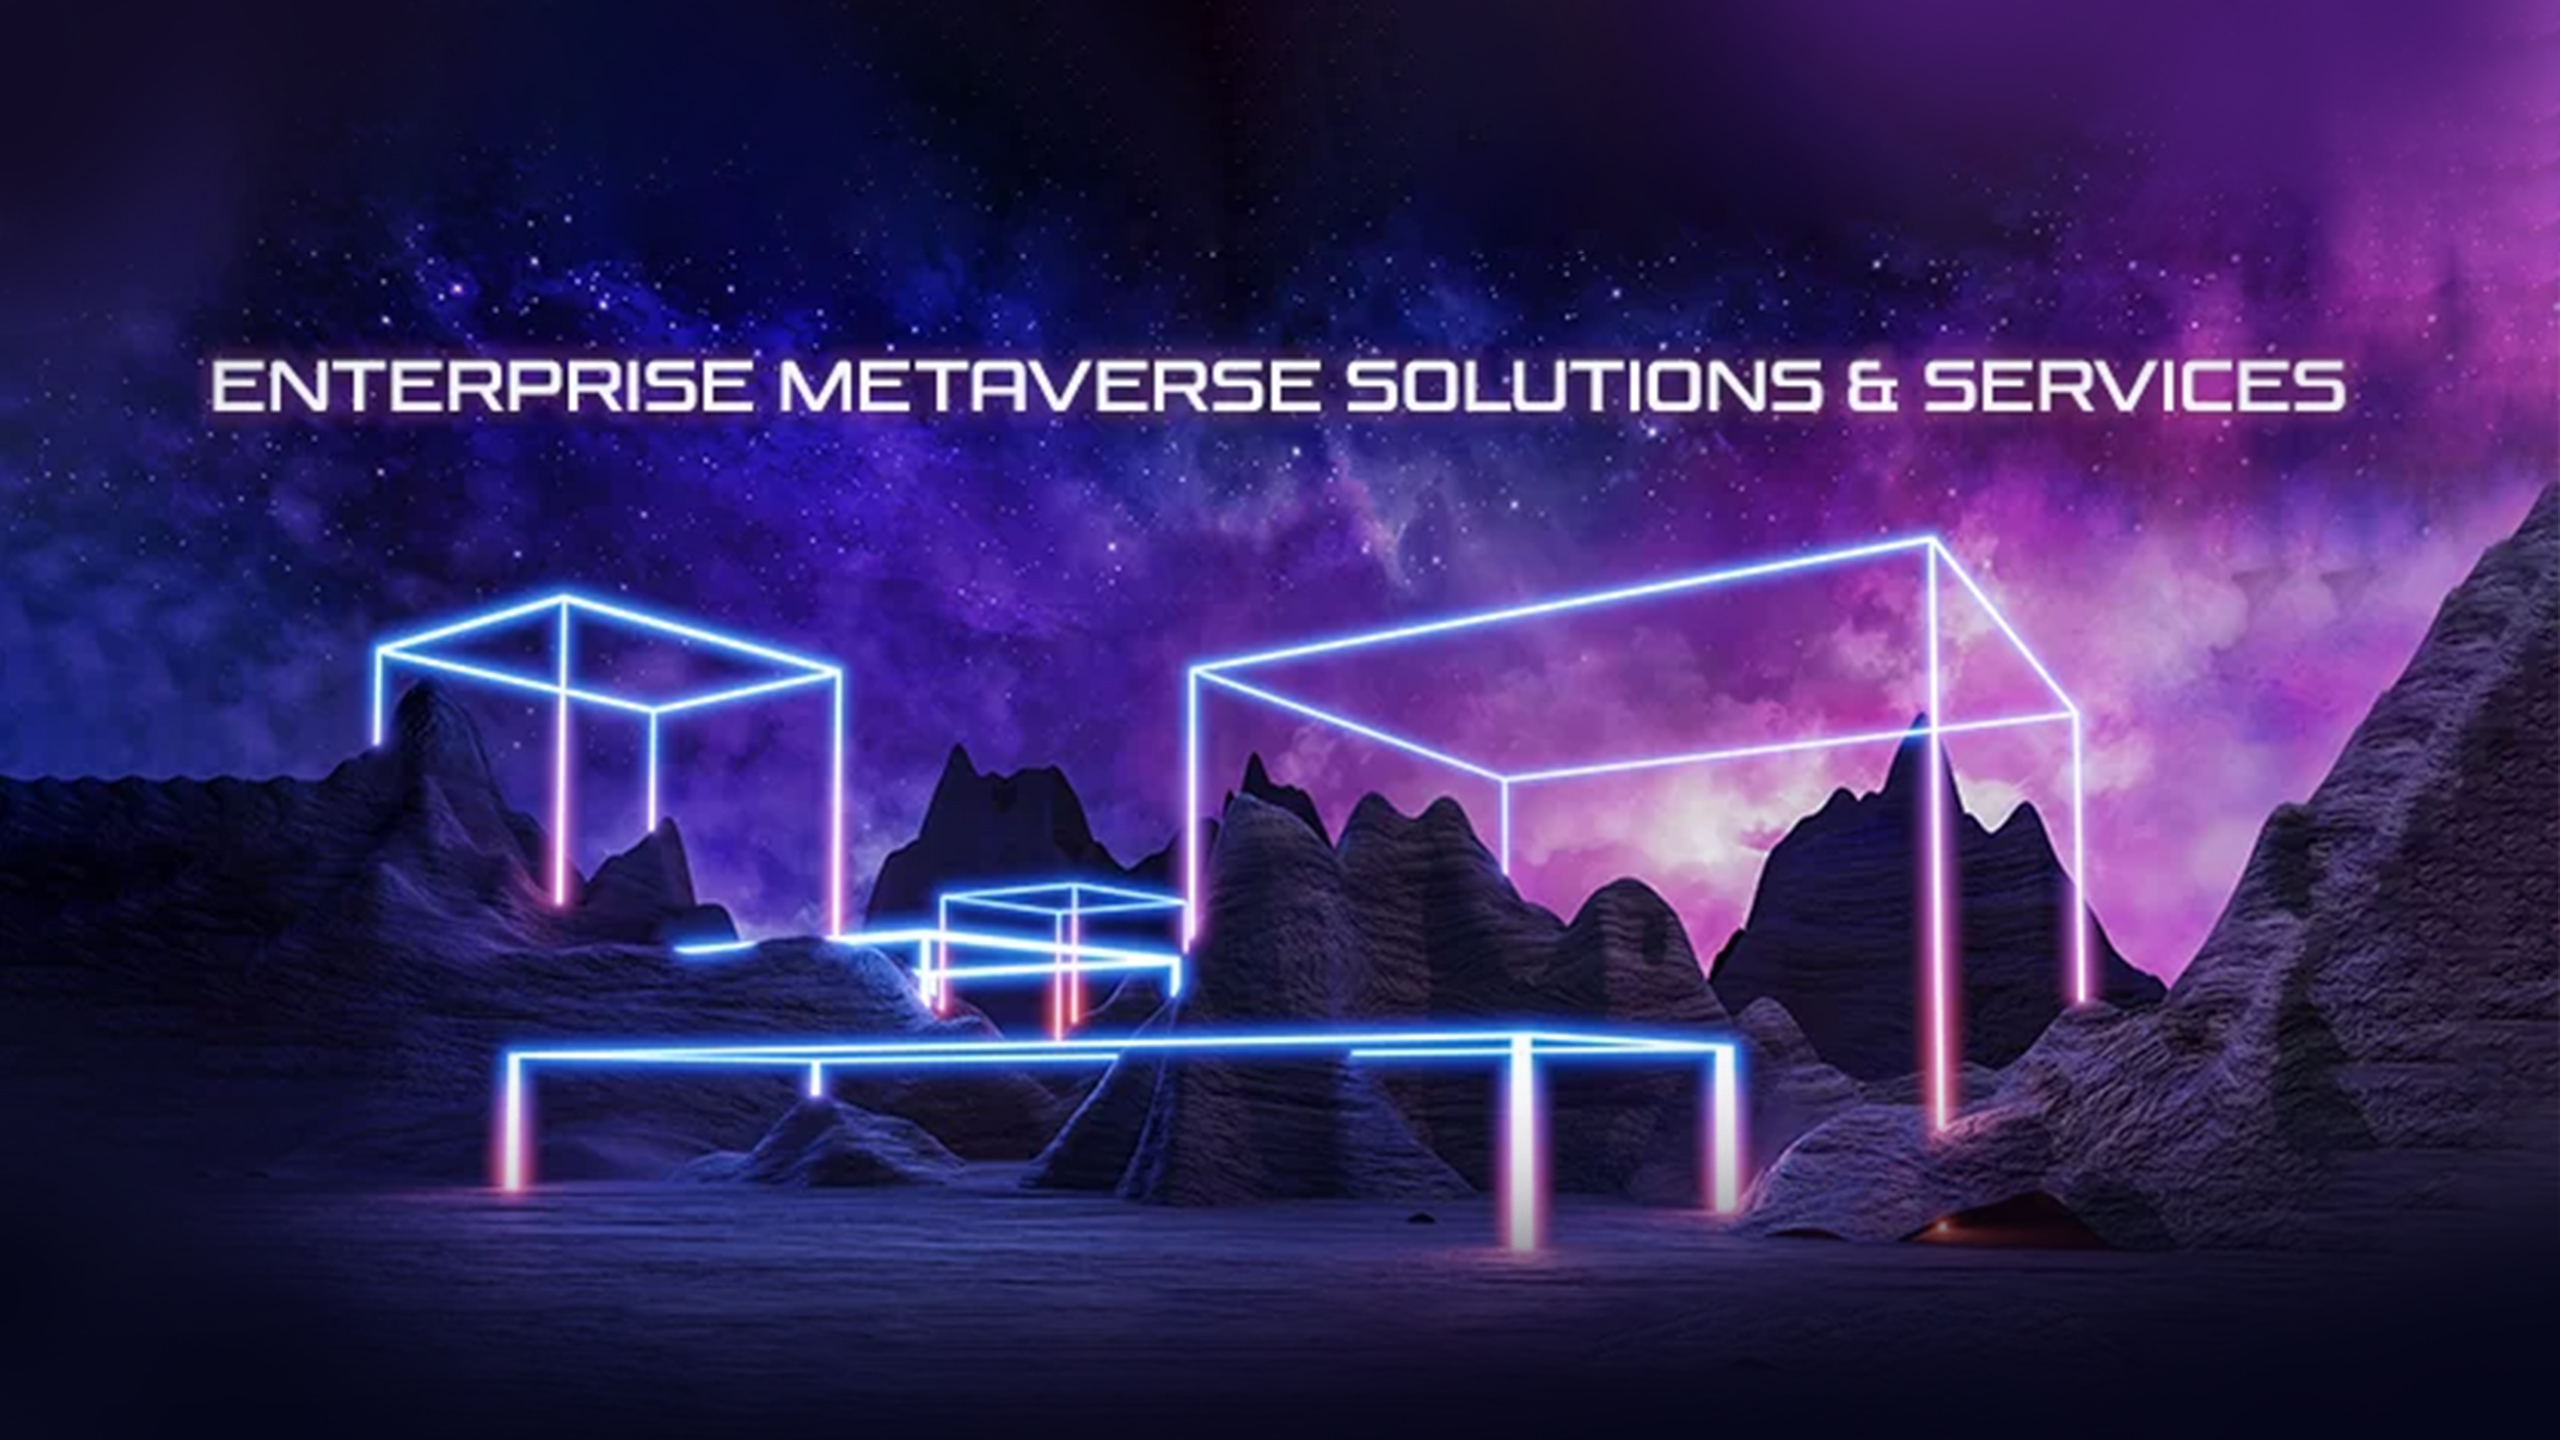 Empowering your Business with Enterprise Metaverse Solutions & Services